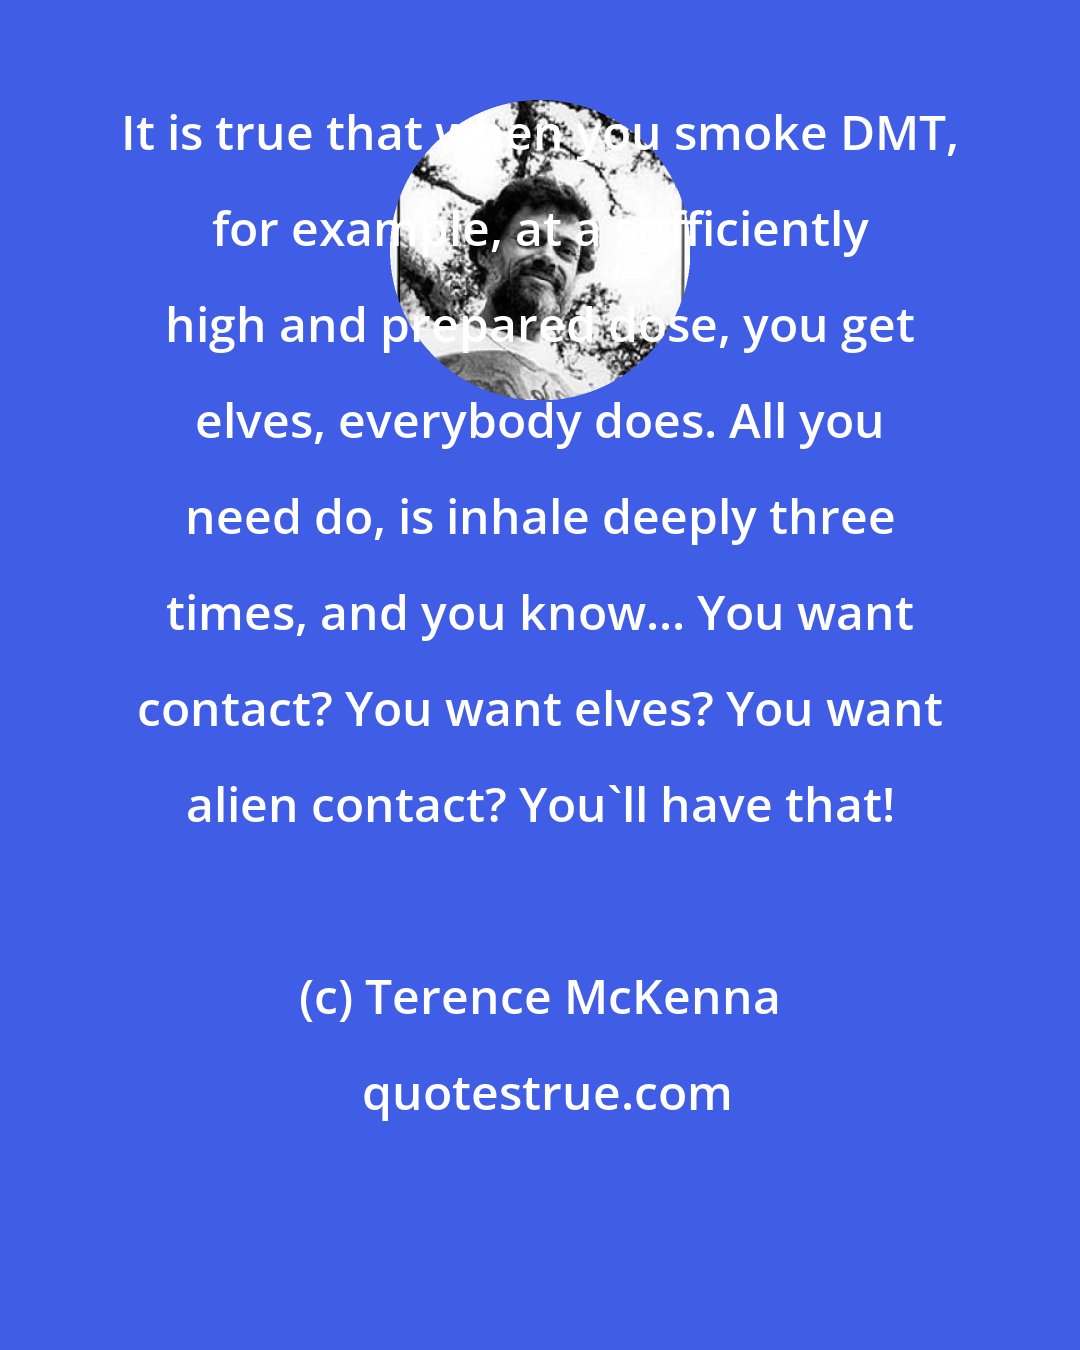 Terence McKenna: It is true that when you smoke DMT, for example, at a sufficiently high and prepared dose, you get elves, everybody does. All you need do, is inhale deeply three times, and you know... You want contact? You want elves? You want alien contact? You'll have that!